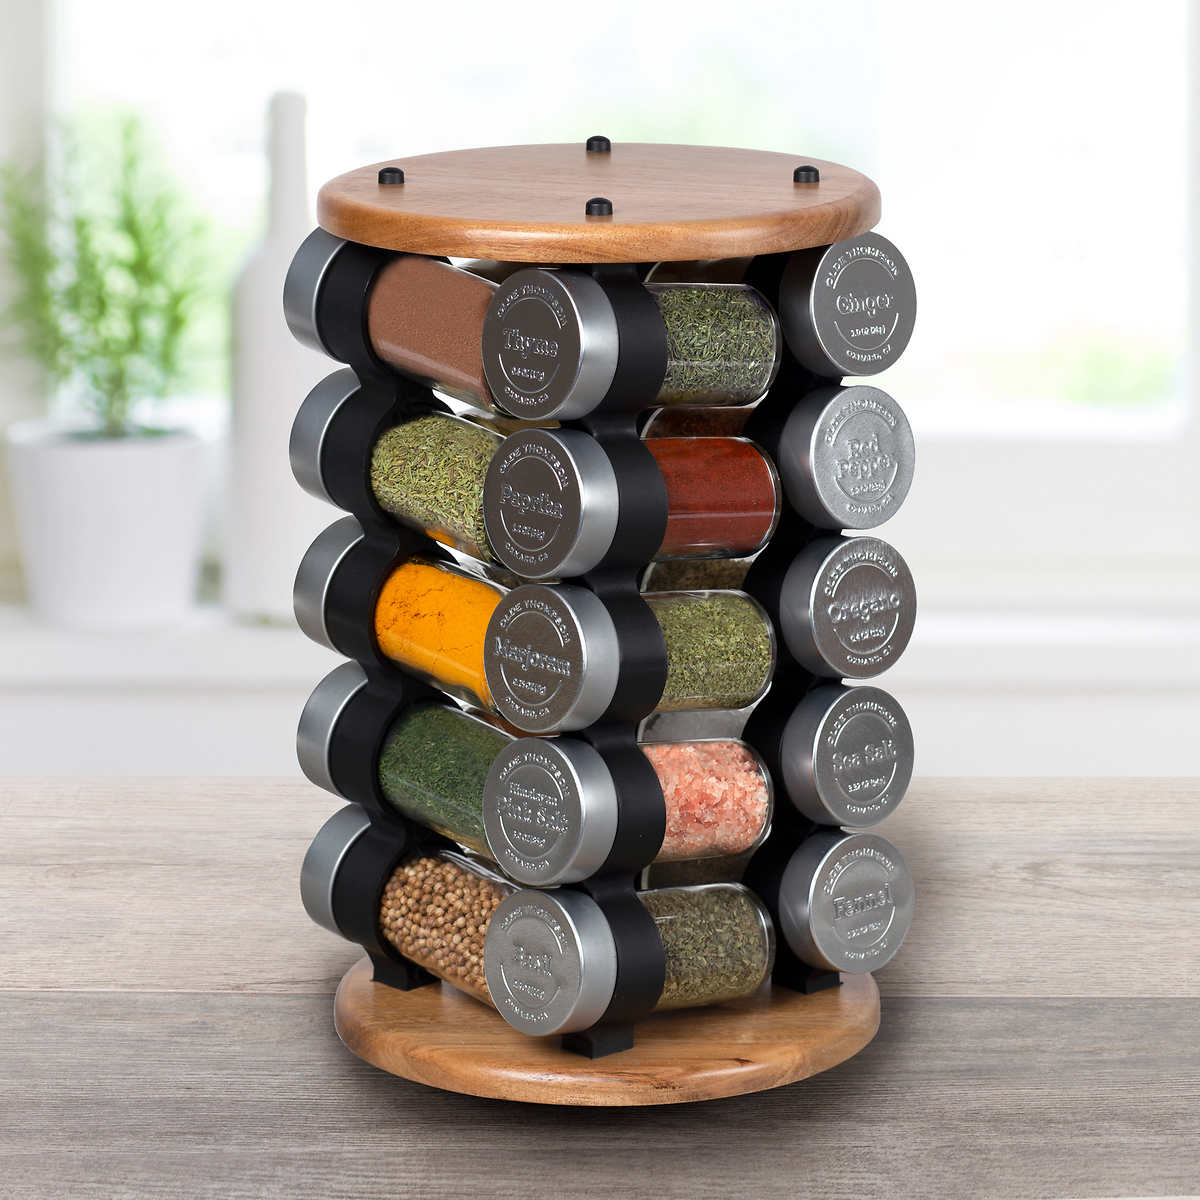 Very Large Rustic Spice Rack Holds 68 Spices and Oils Green Coyote  Woodworking Spice Rack to Hold Spice Jars and Oils 